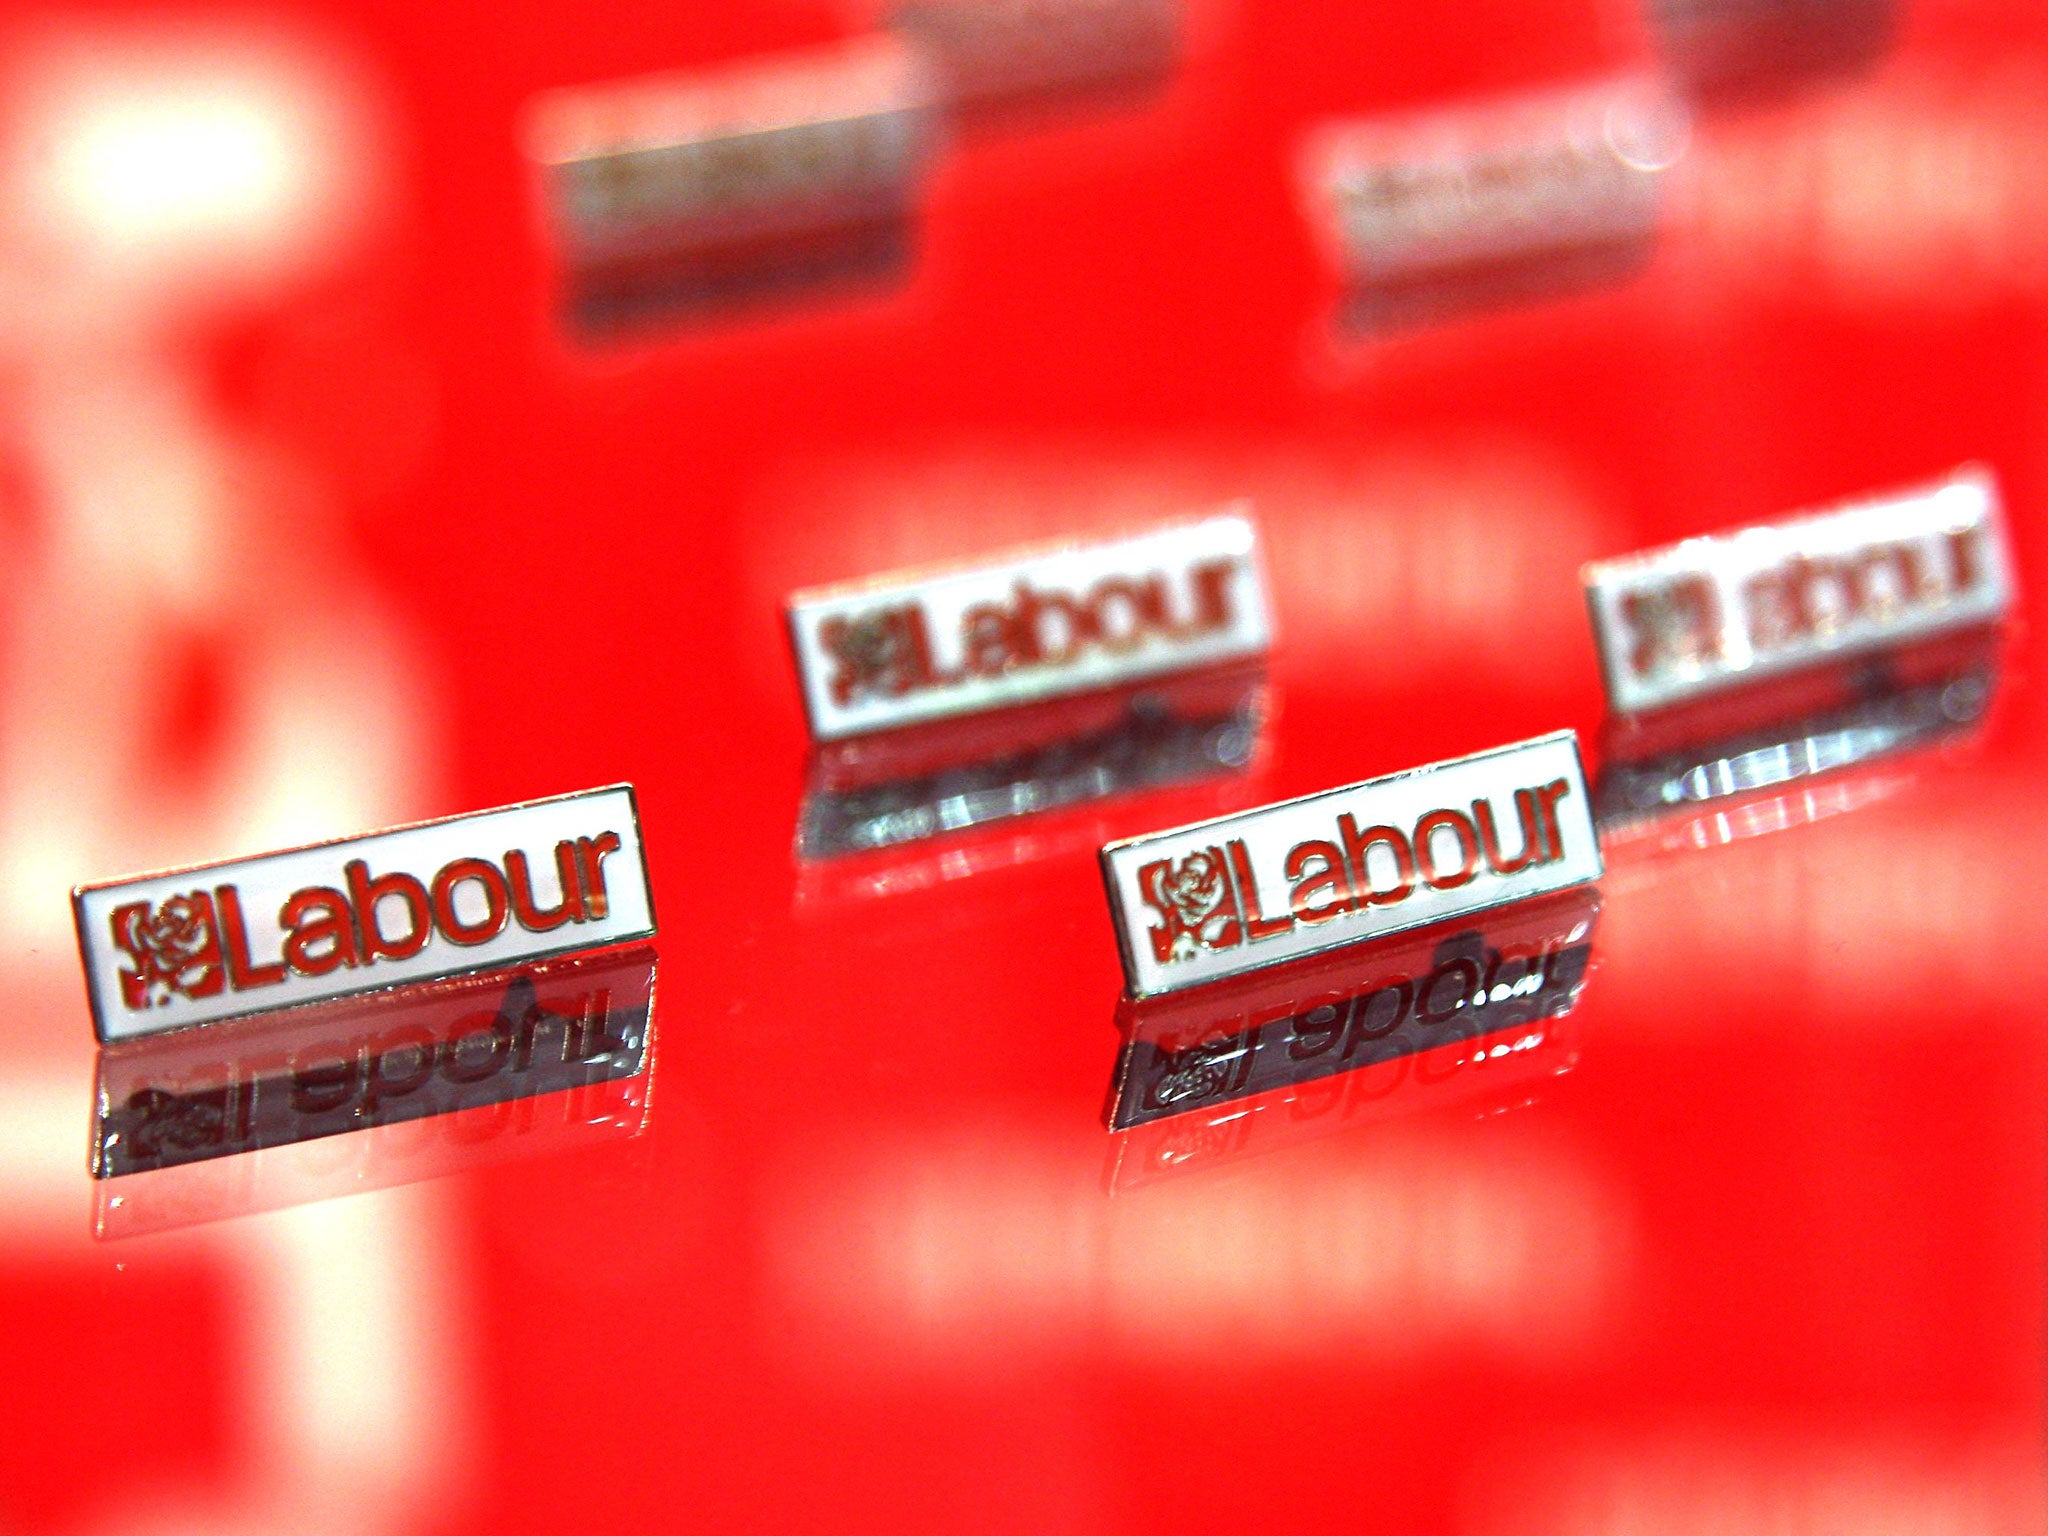 Labour Party badges go on sale at the Labour Party conference on September 24, 2007 in Bournemouth, England.